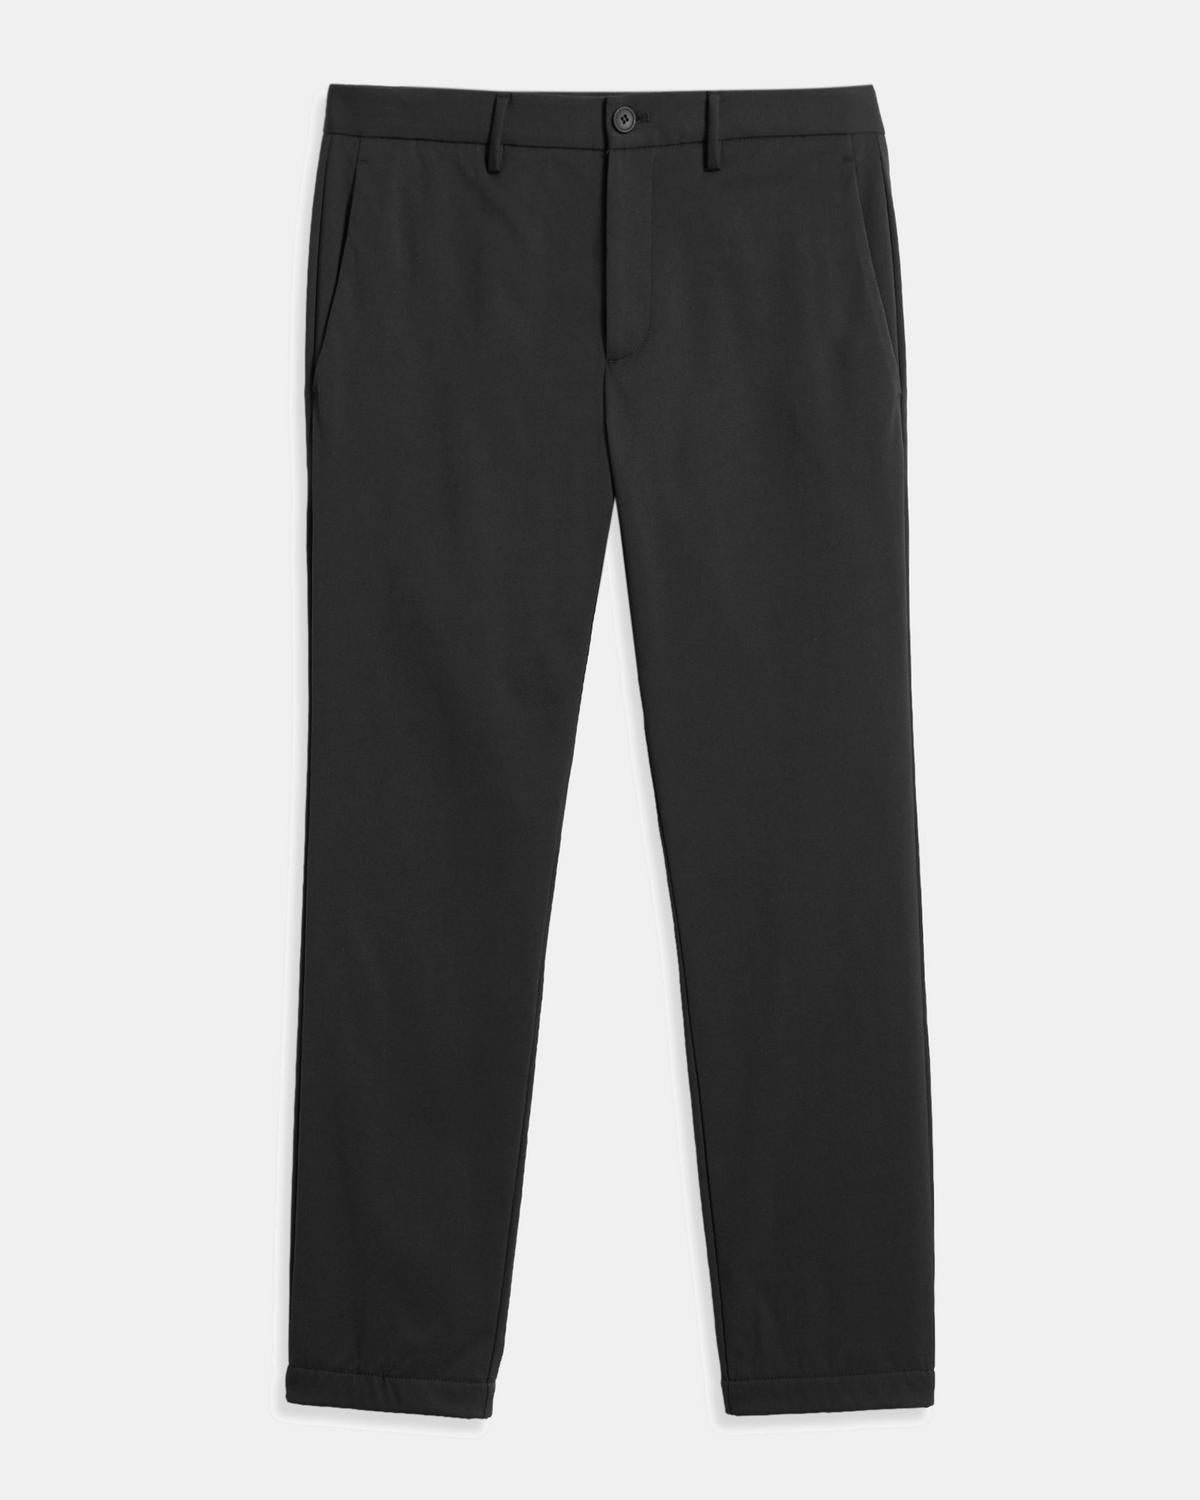 Theory - Zaine Neoteric Pant in Black